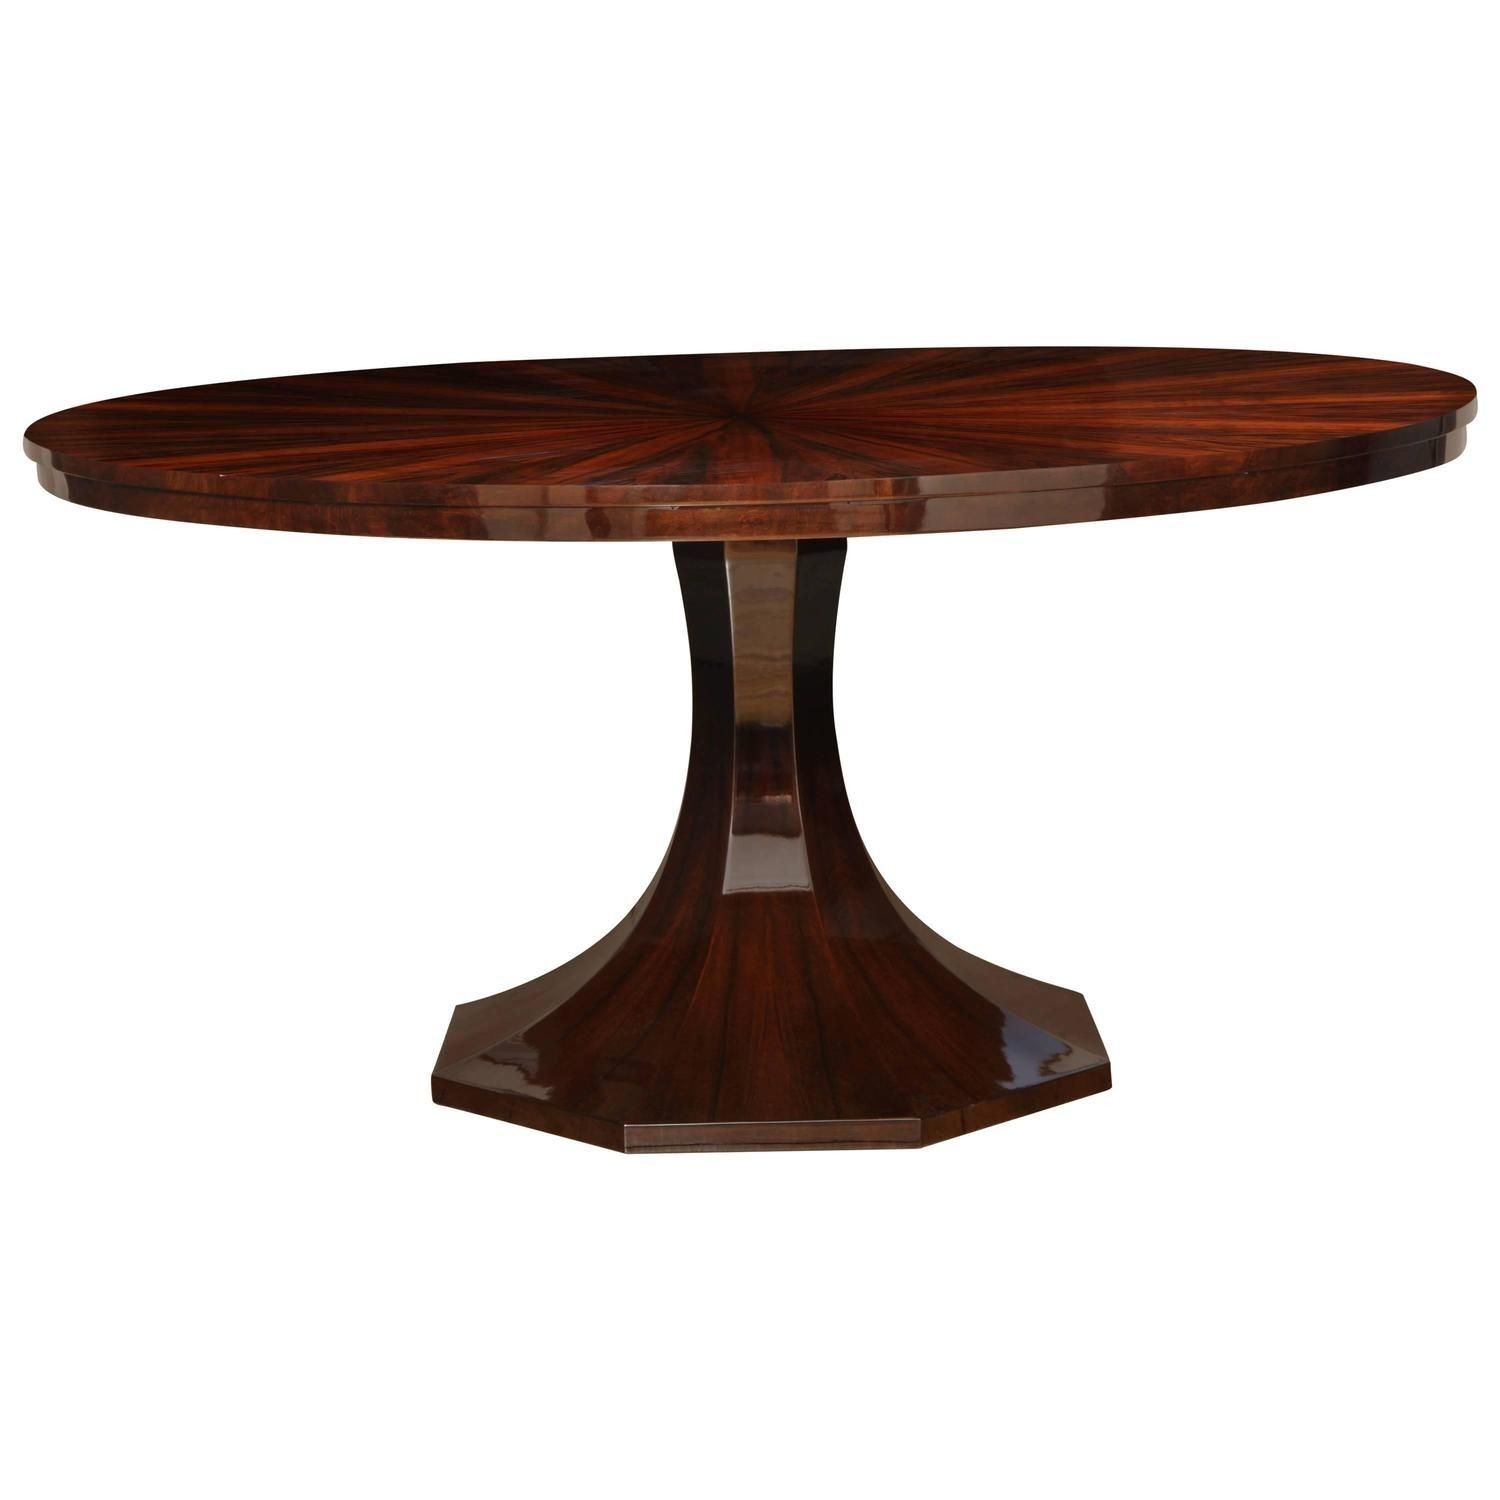 Antique Oval Dining Tables For Sale Beautiful Art Deco Round Intended For Most Recently Released Magnolia Home English Country Oval Dining Tables (View 8 of 20)